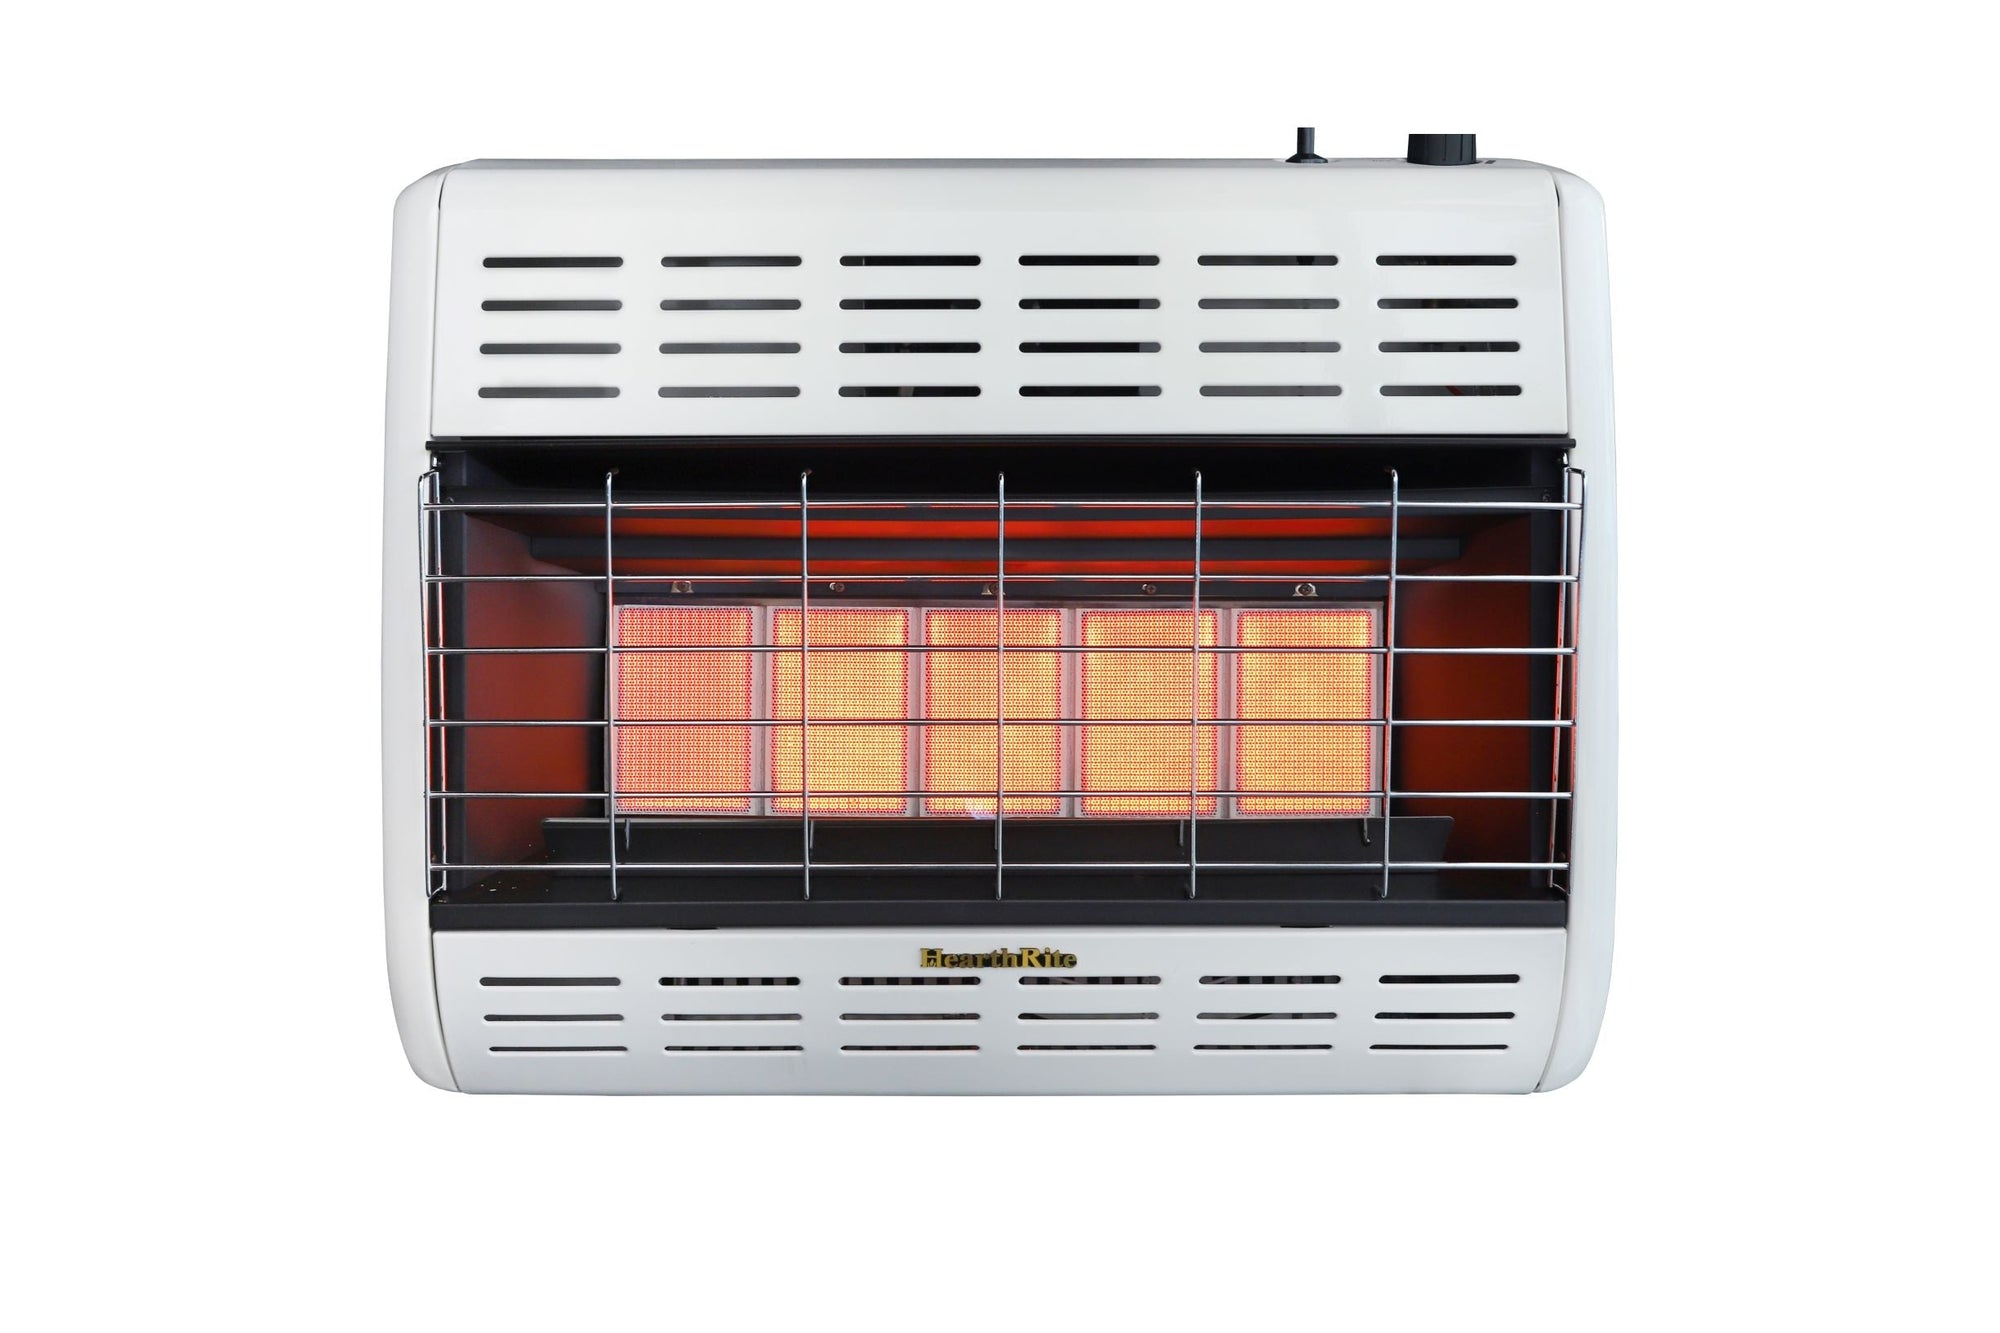 HearthRite Infrared Space Heater: 30,000 BTU unit with optional thermostat or manual ignition, perfect for room object heating